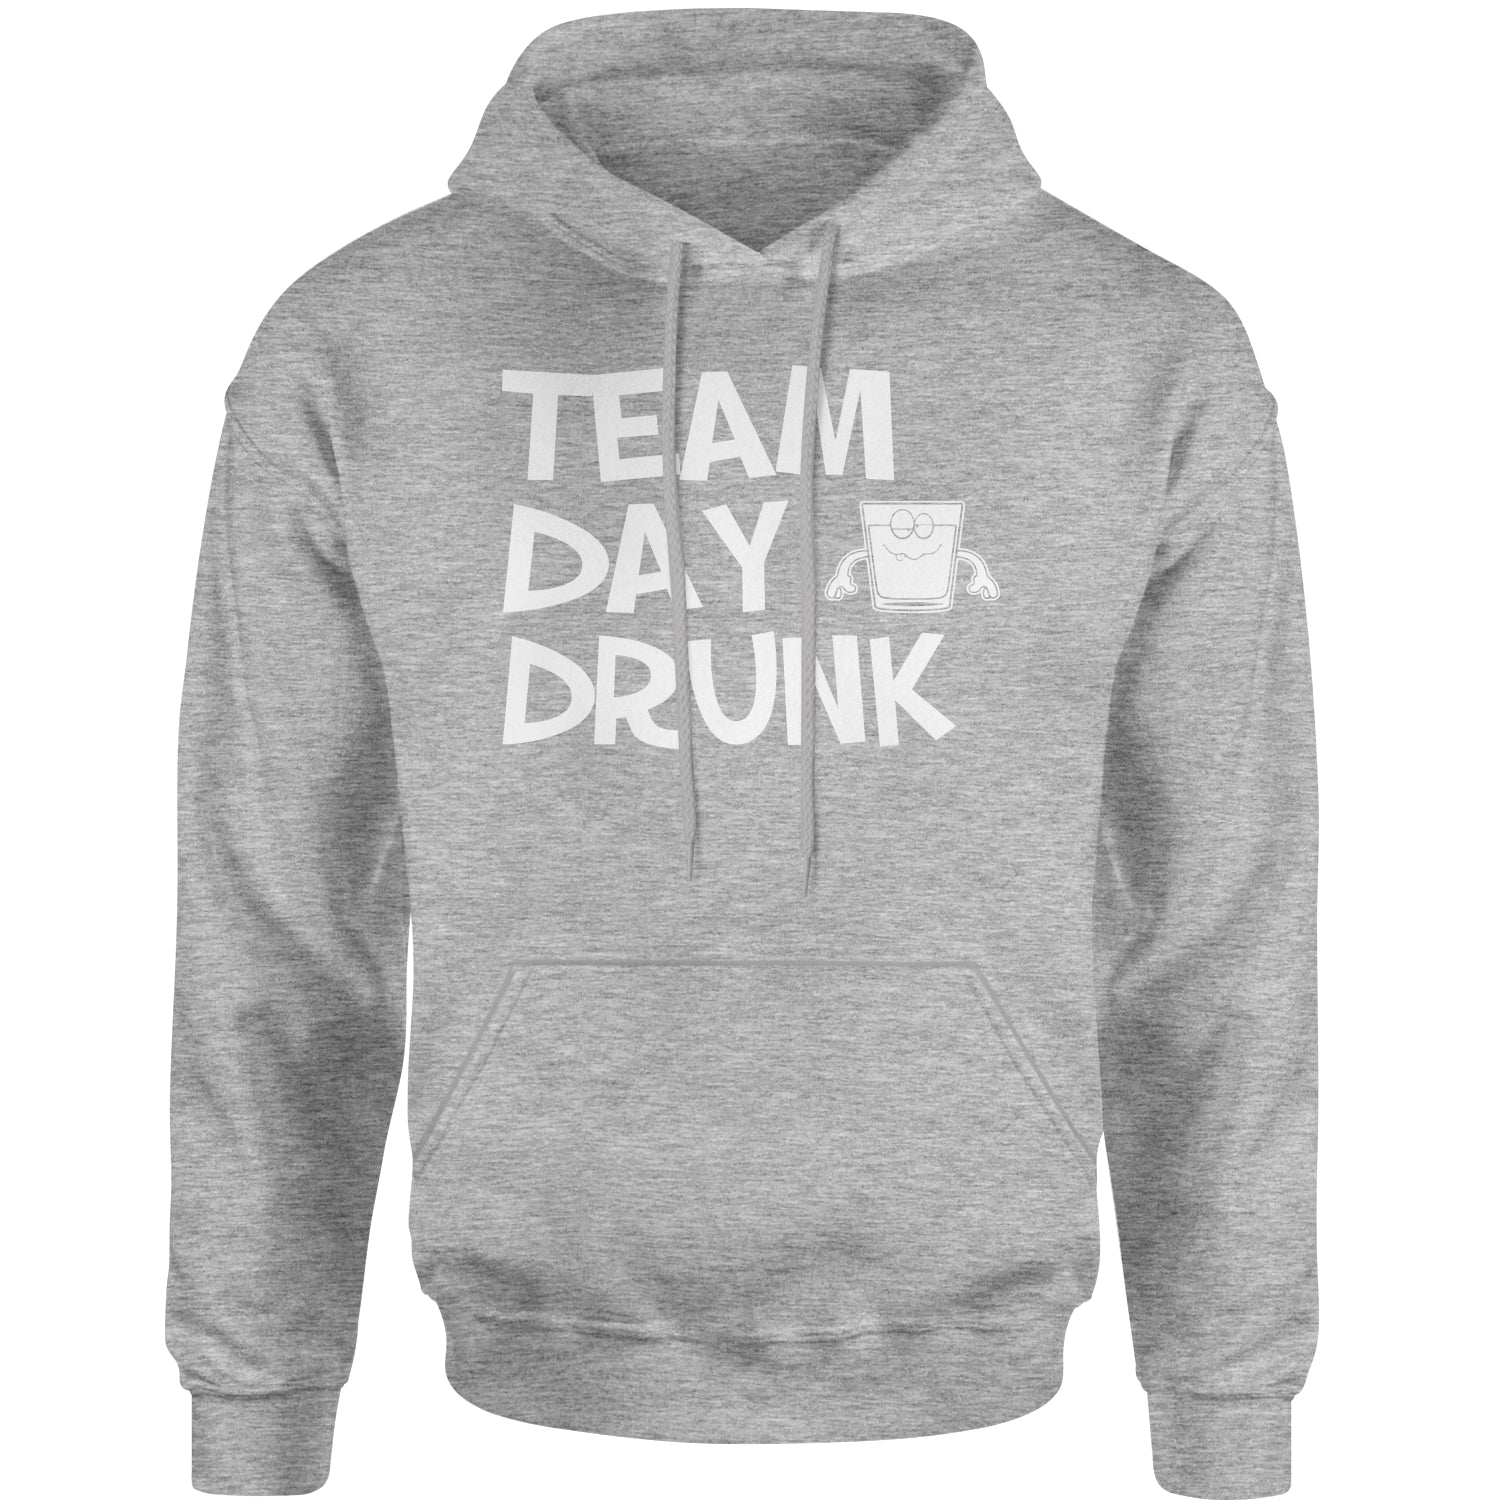 Team Day Drunk Adult Hoodie Sweatshirt beer, day, drinking, fun, funday, shots, Sunday, tatsing, wine by Expression Tees